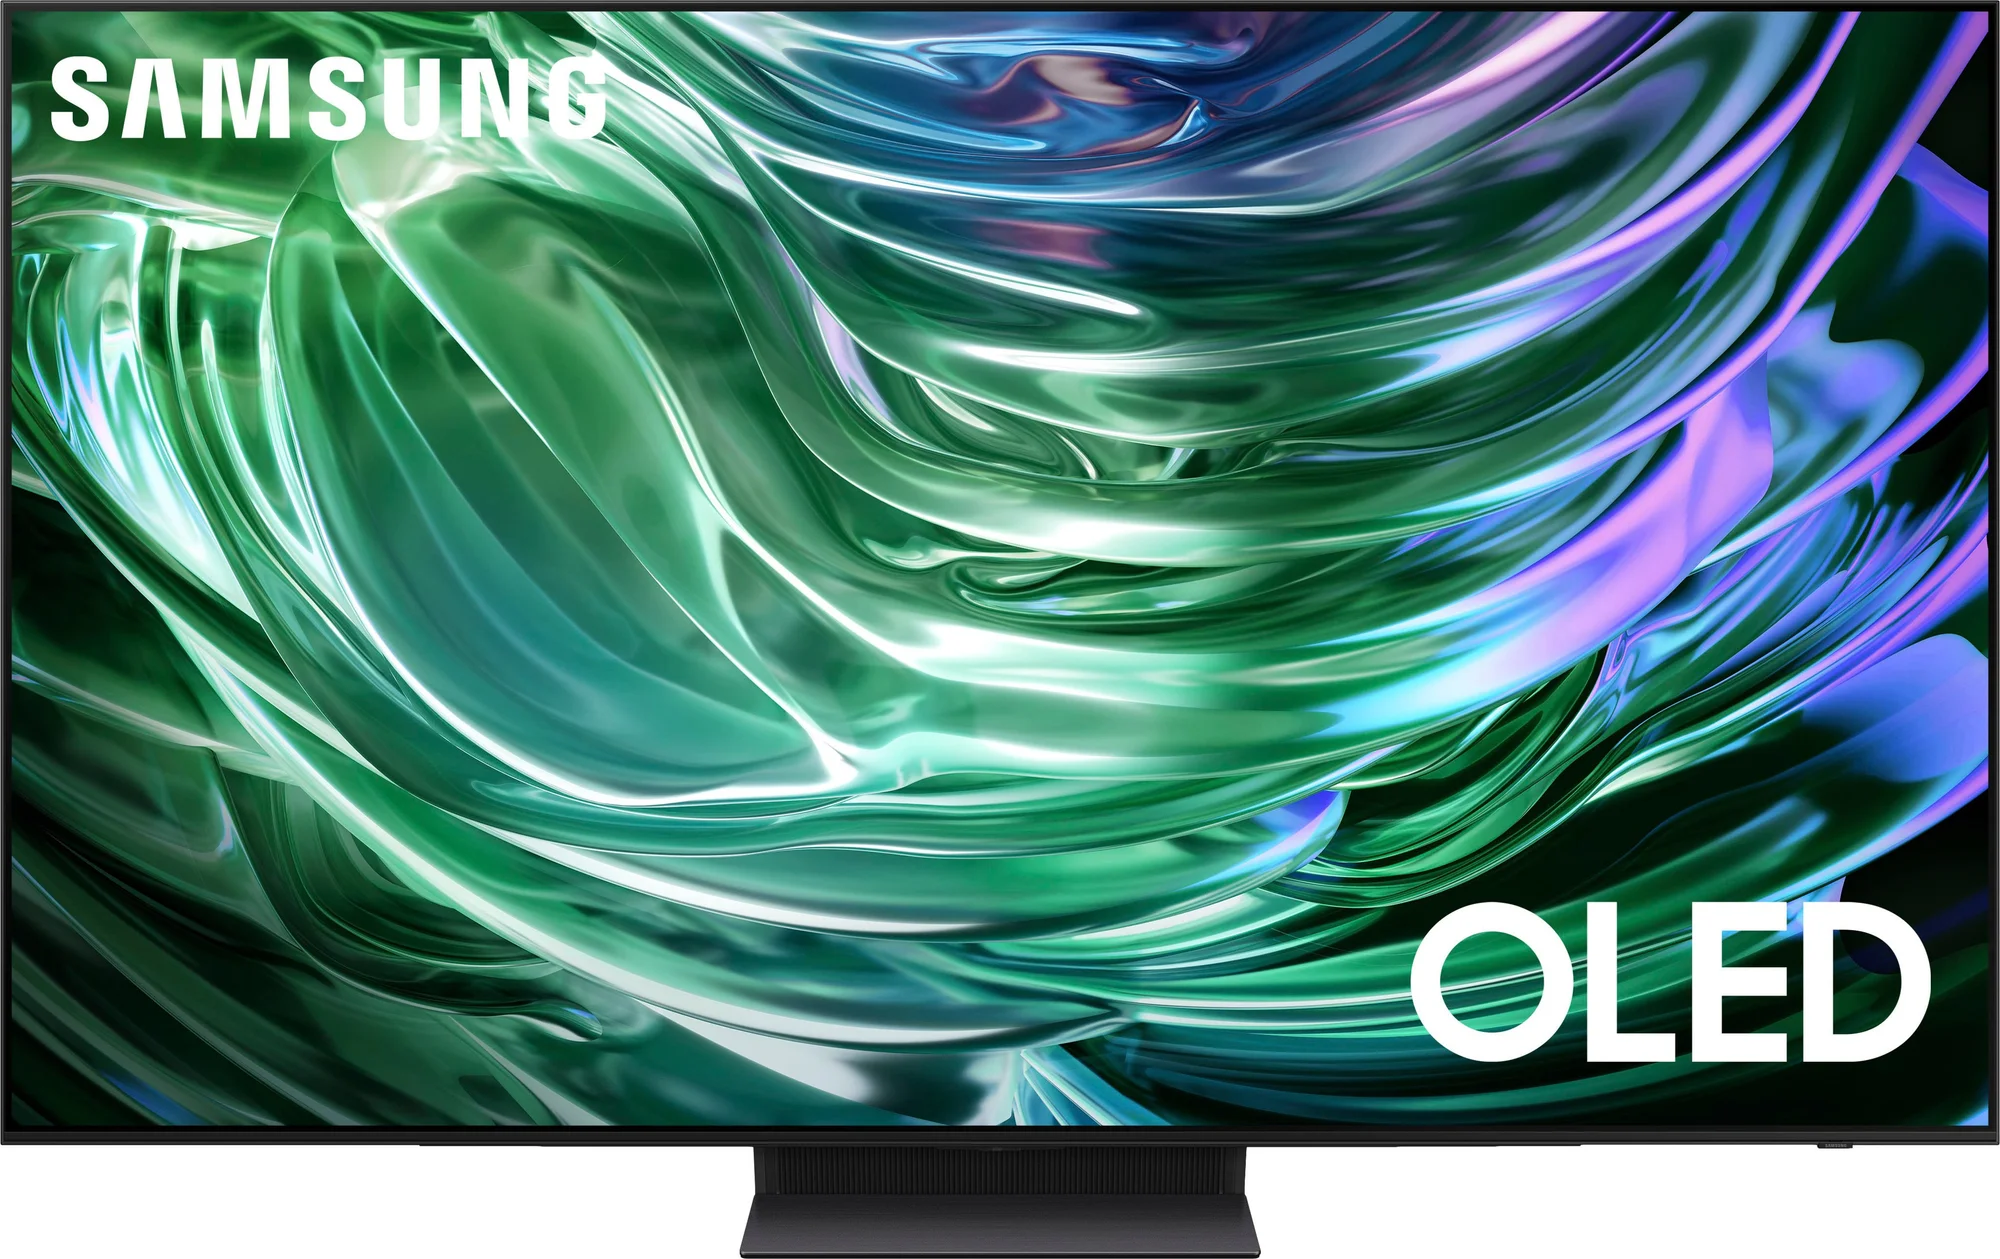 Samsung S90D OLED TV: Sleek Design Complements Great Picture Quality